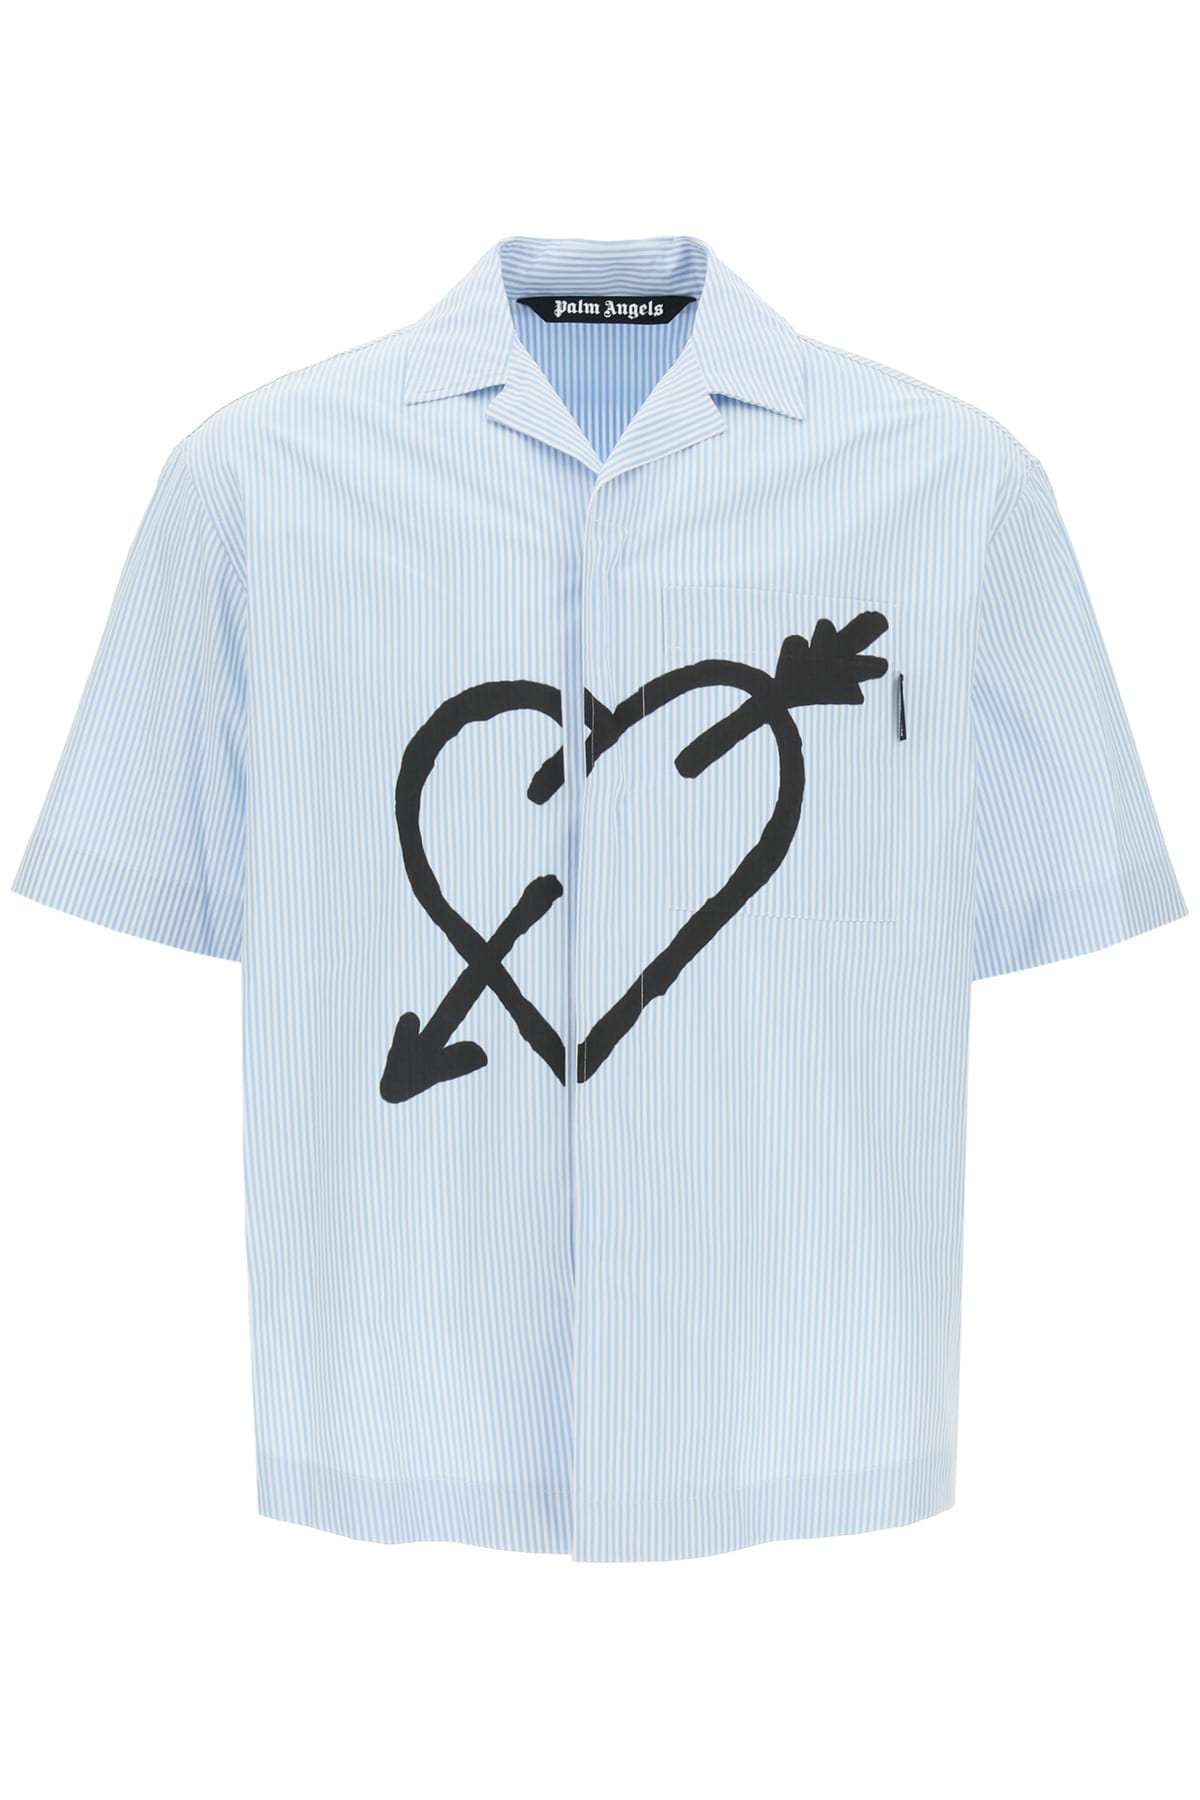 Palm Angels Striped Shirt With Logo